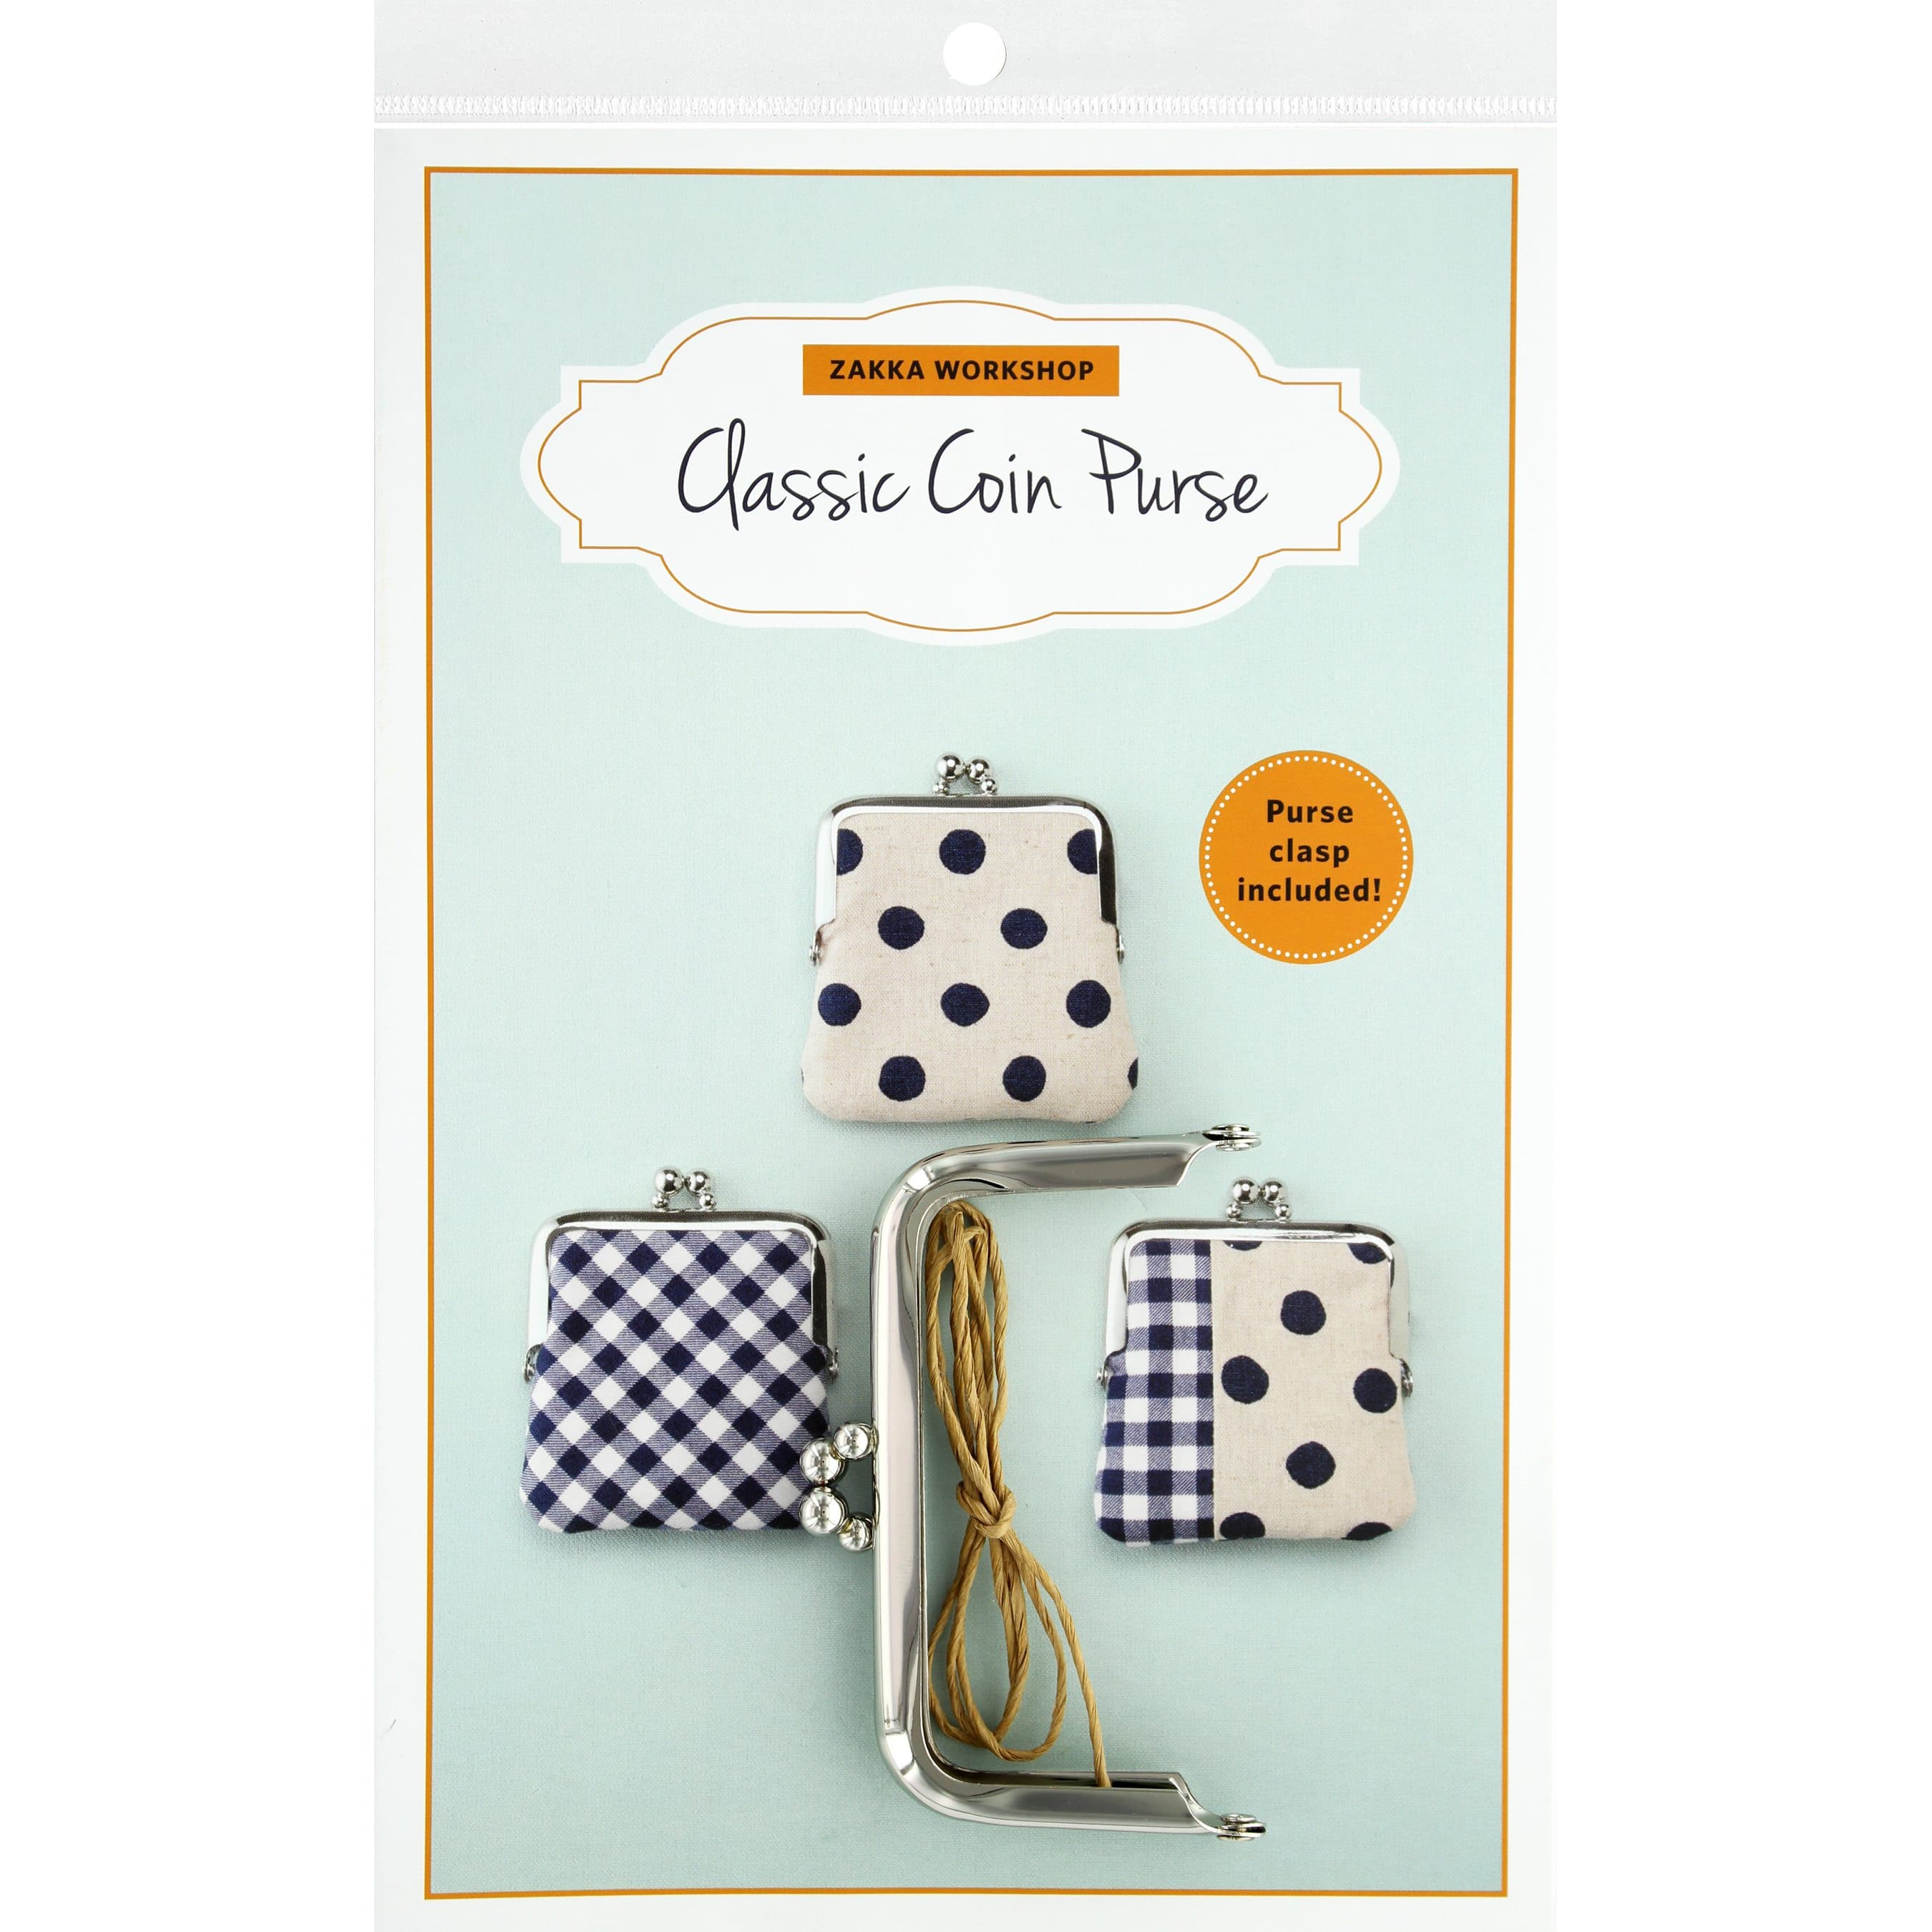 Zakka Workshop Classic Coin Purse with Silver Clasp Kit | 3.25 x 3.5 | Michaels